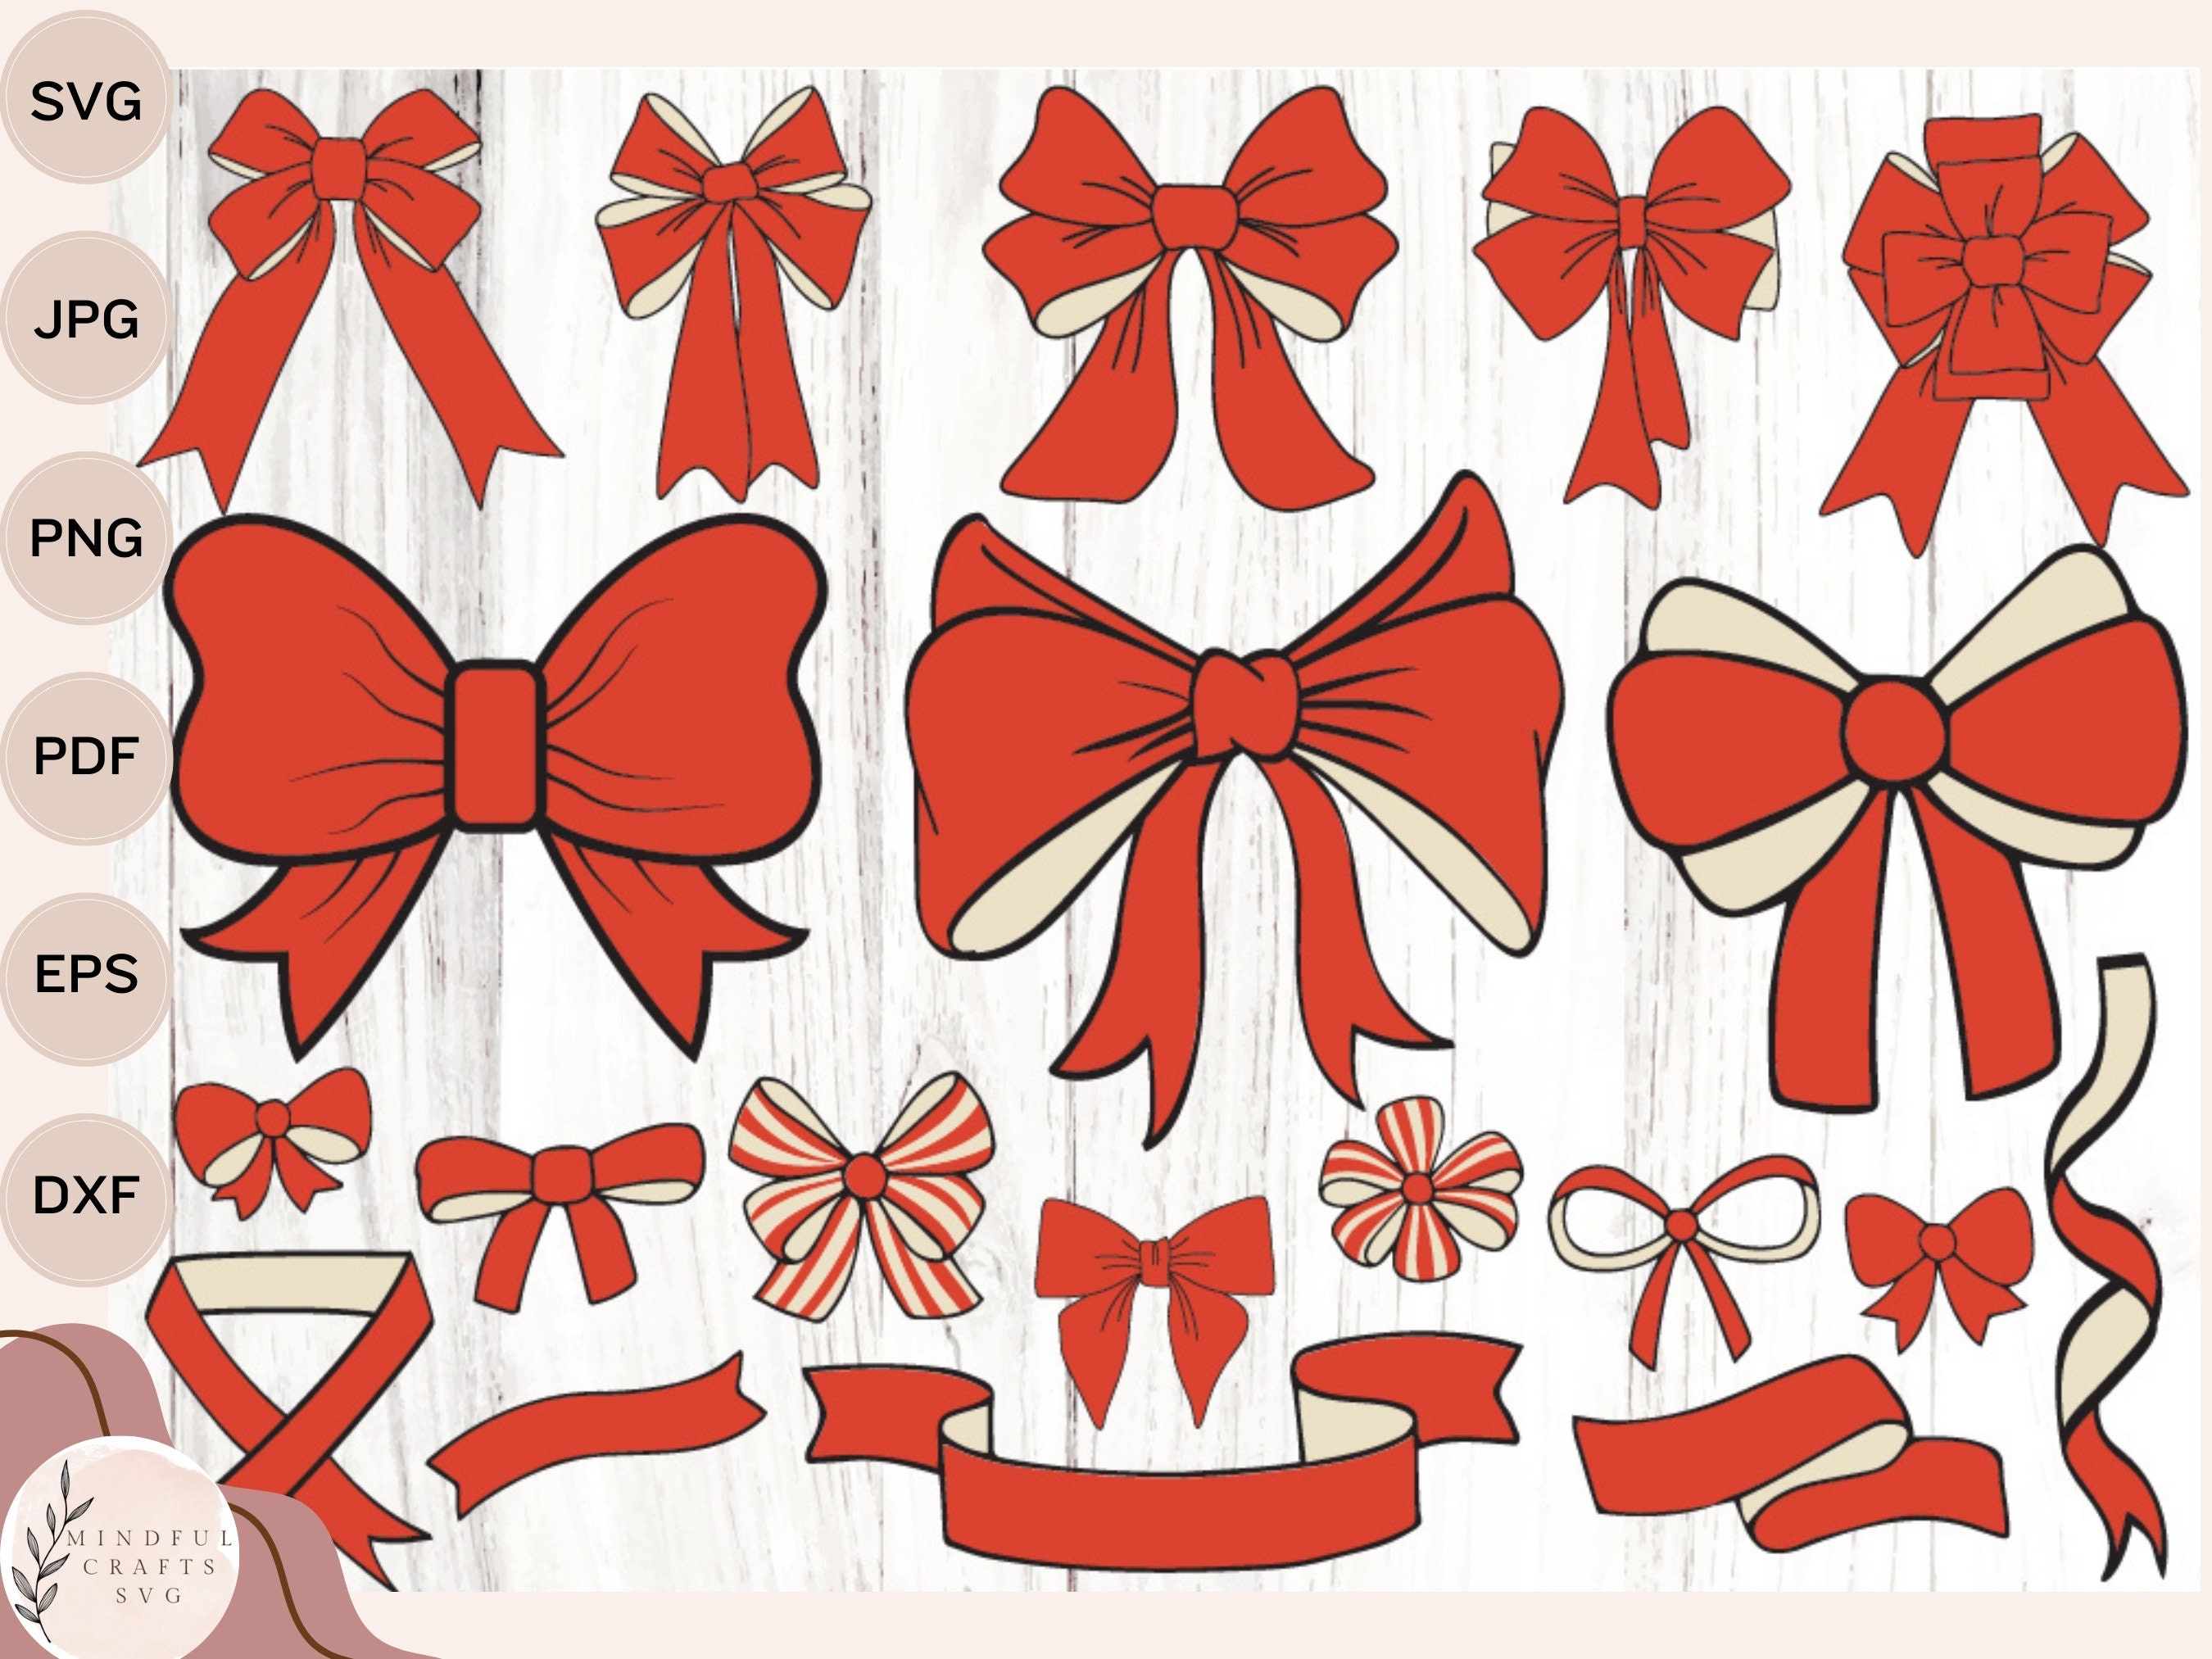 Bow ribbon svg, gift ribbon svg, red bow ribbon svg, gift decoration svg,  svg, cut file, design, dxf, clipart, vector, icon, eps, pdf, png